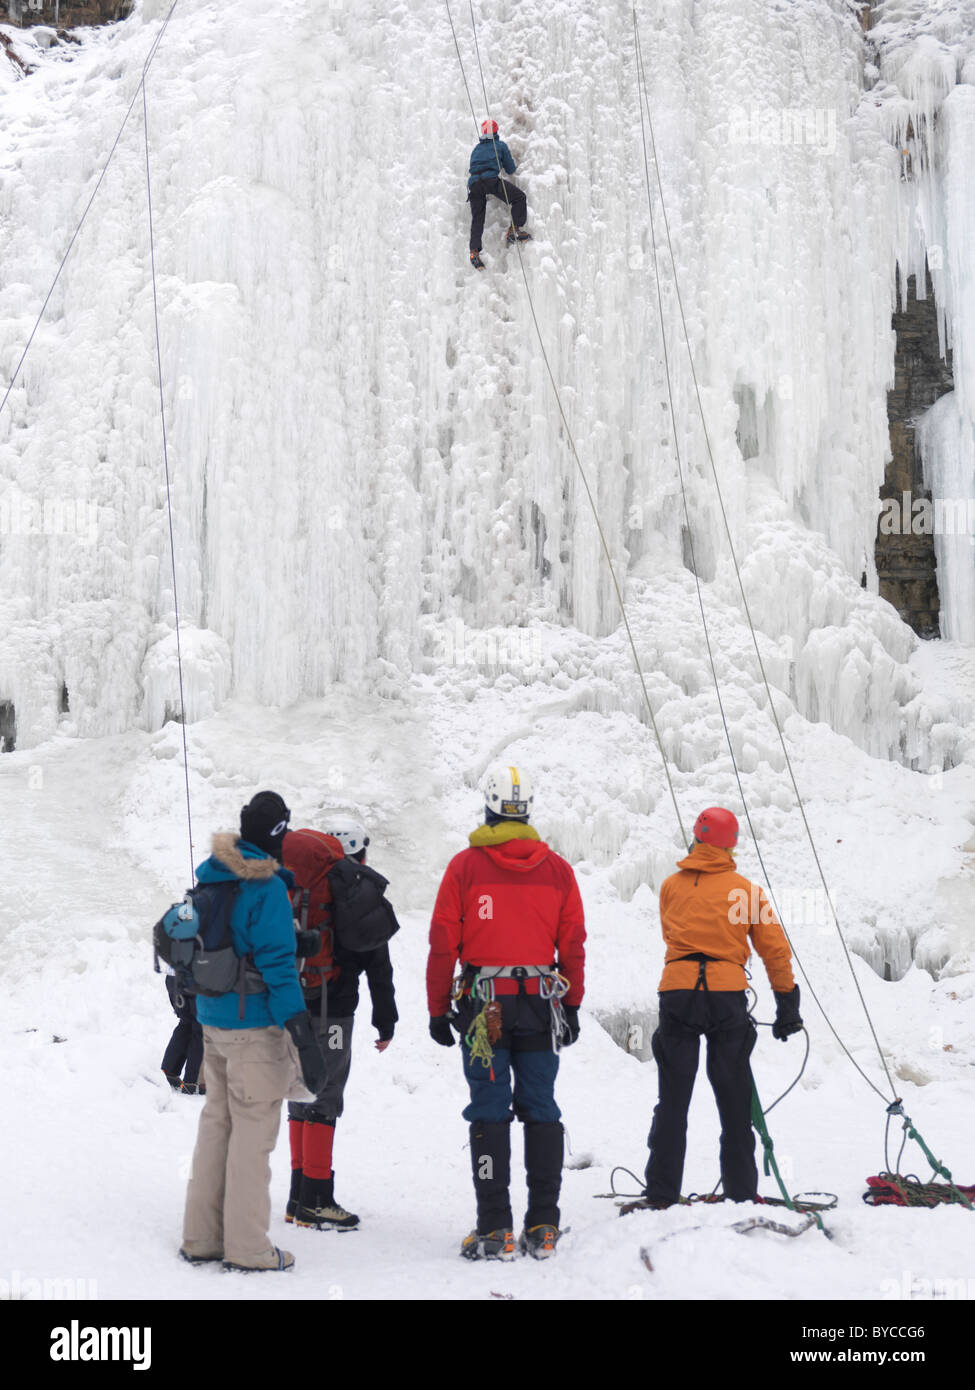 Group of ice climbers at a frozen waterfall. Wintertime scenic, Ontario, Canada. Stock Photo